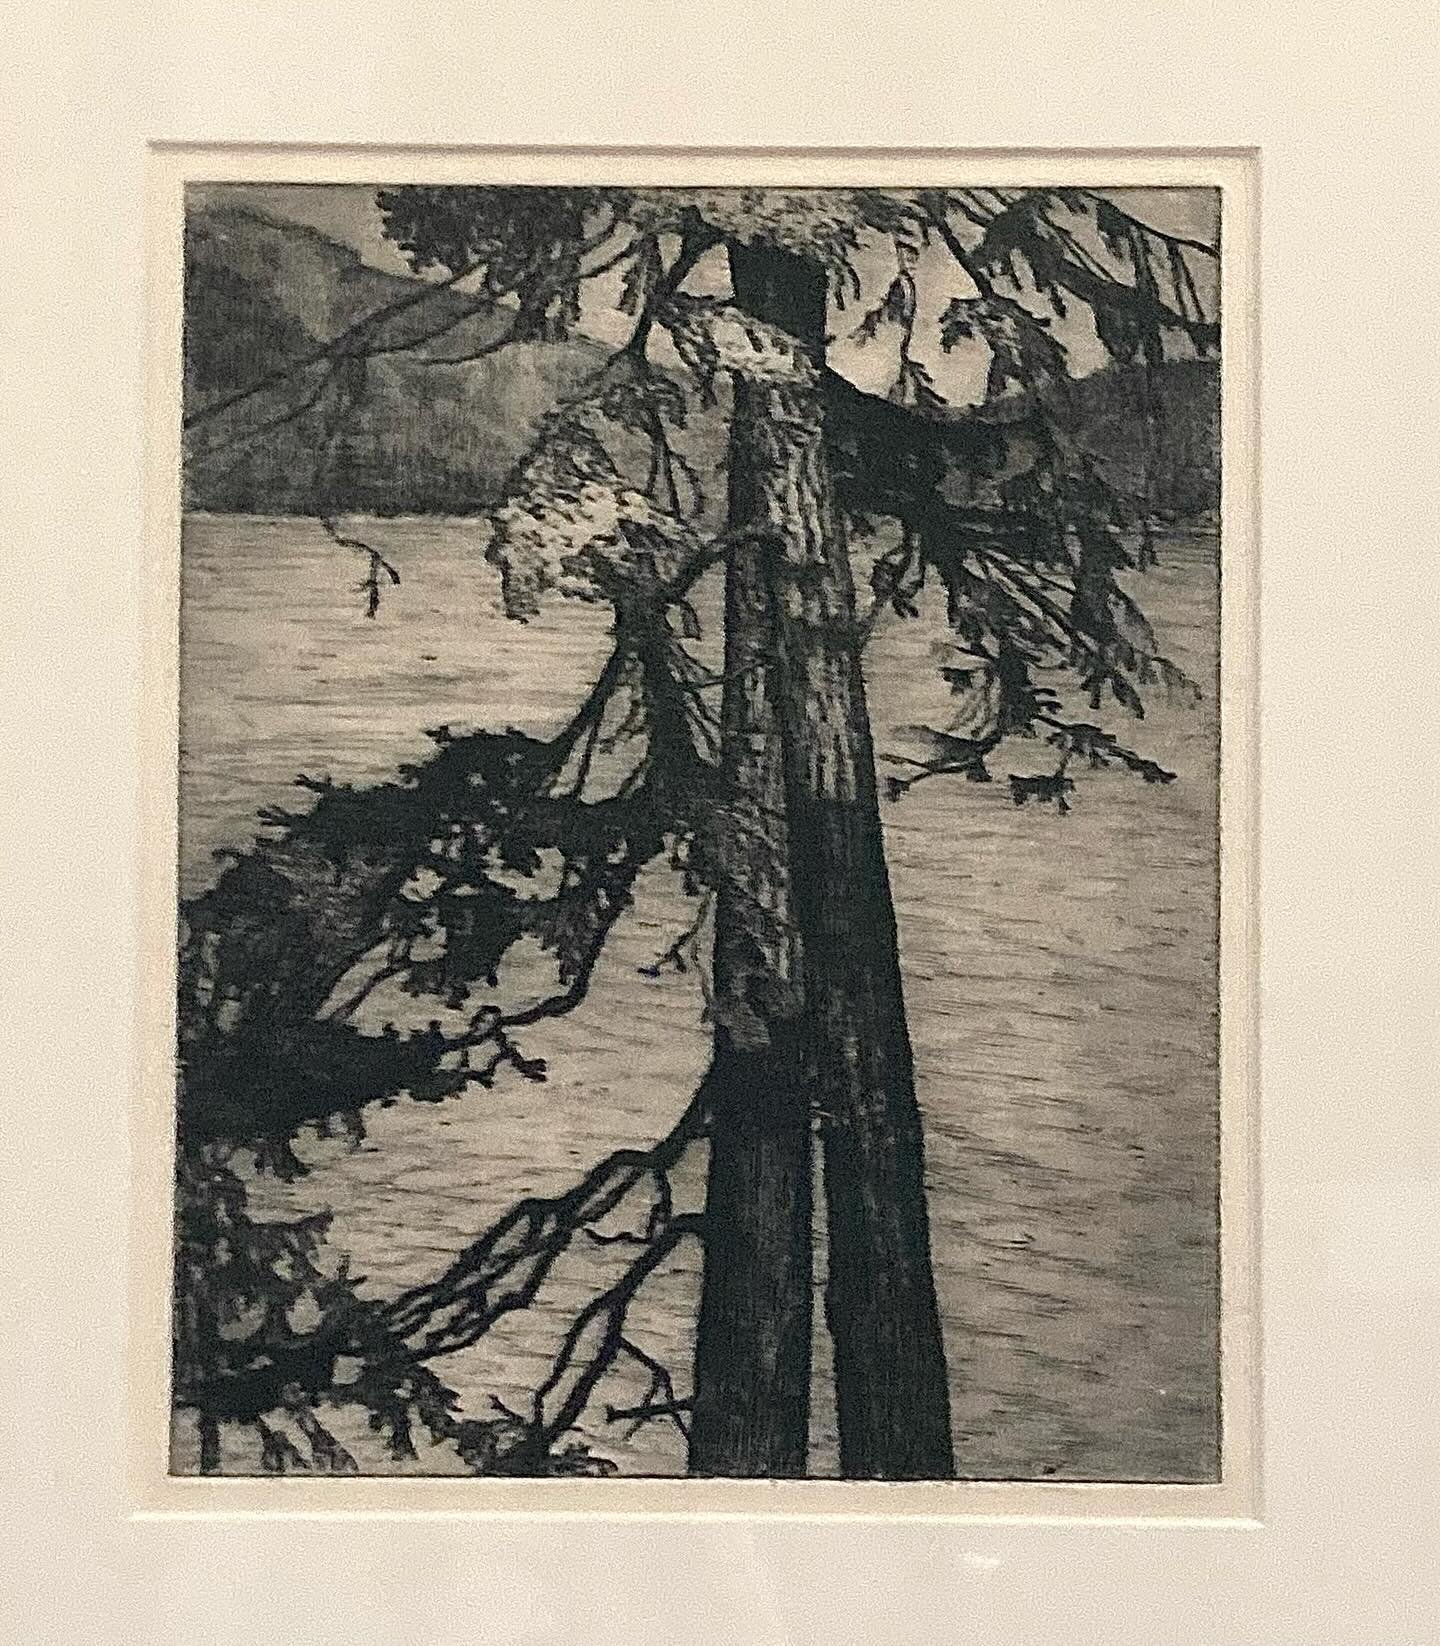 Helen&rsquo;s earliest etchings of trees reflect her developing skill and mastery of detail.  We have several of Helen&rsquo;s early works on display at the museum. We&rsquo;d love to have you visit the museum and see them up close. Info@theloggie.or